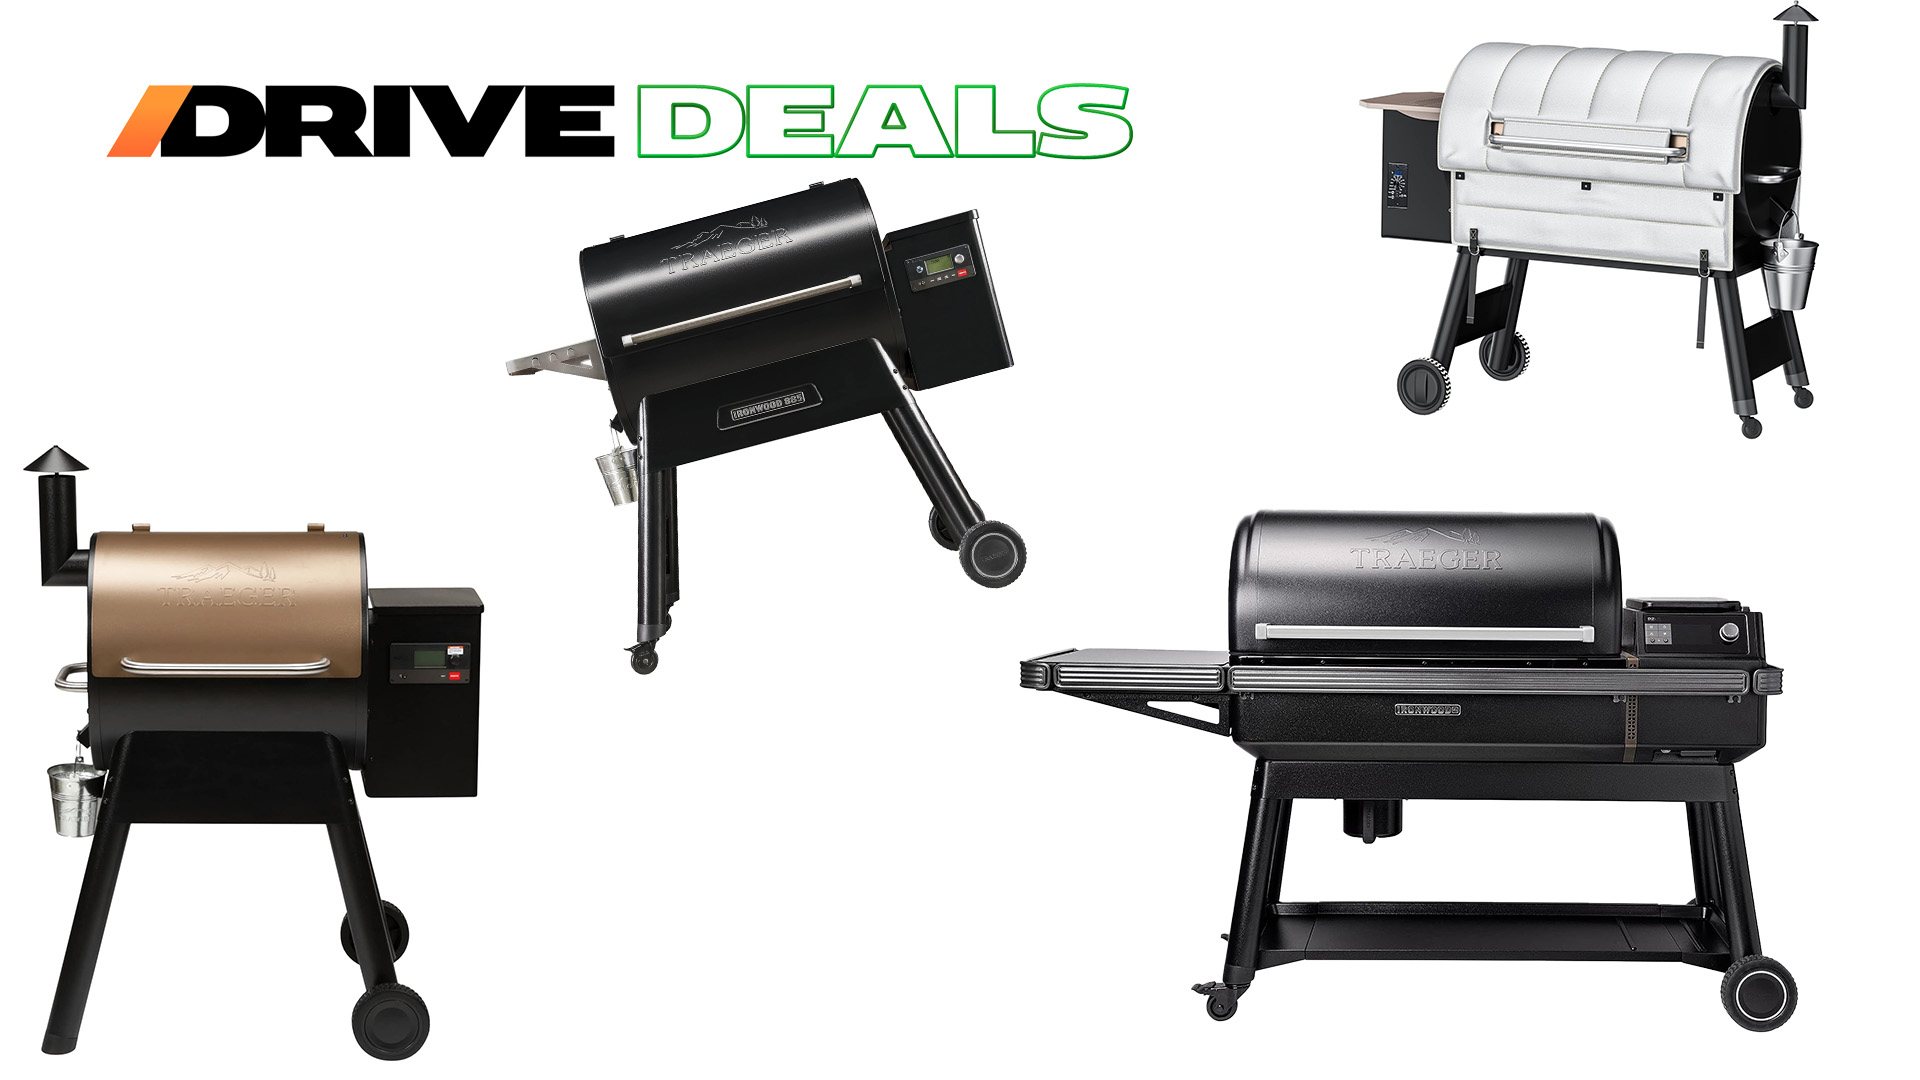 Get More Of Your Smoker Needs With Great Deals During Prime Days